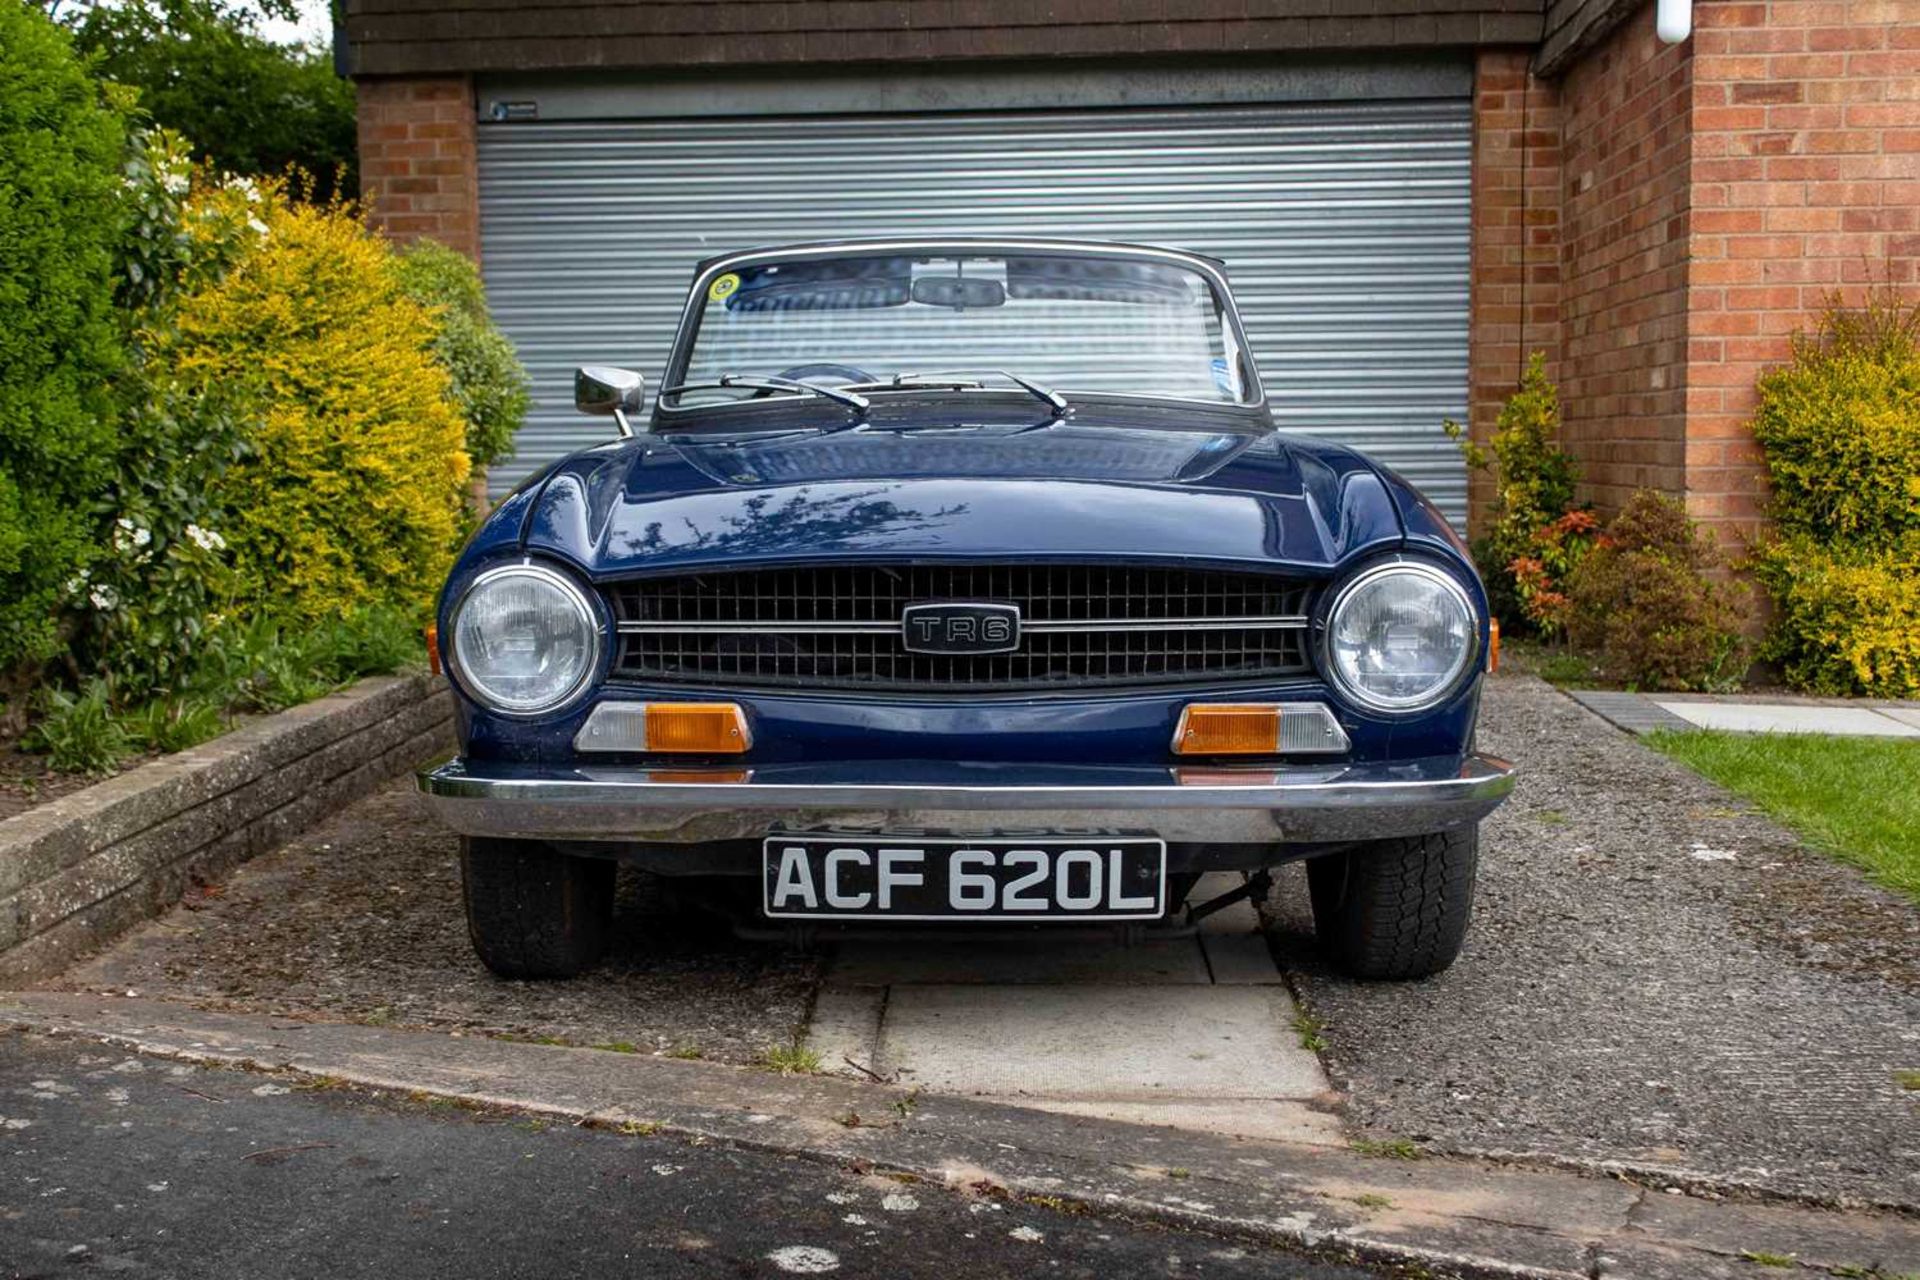 1972 Triumph TR6 Home market example, specified with manual overdrive transmission - Image 3 of 95